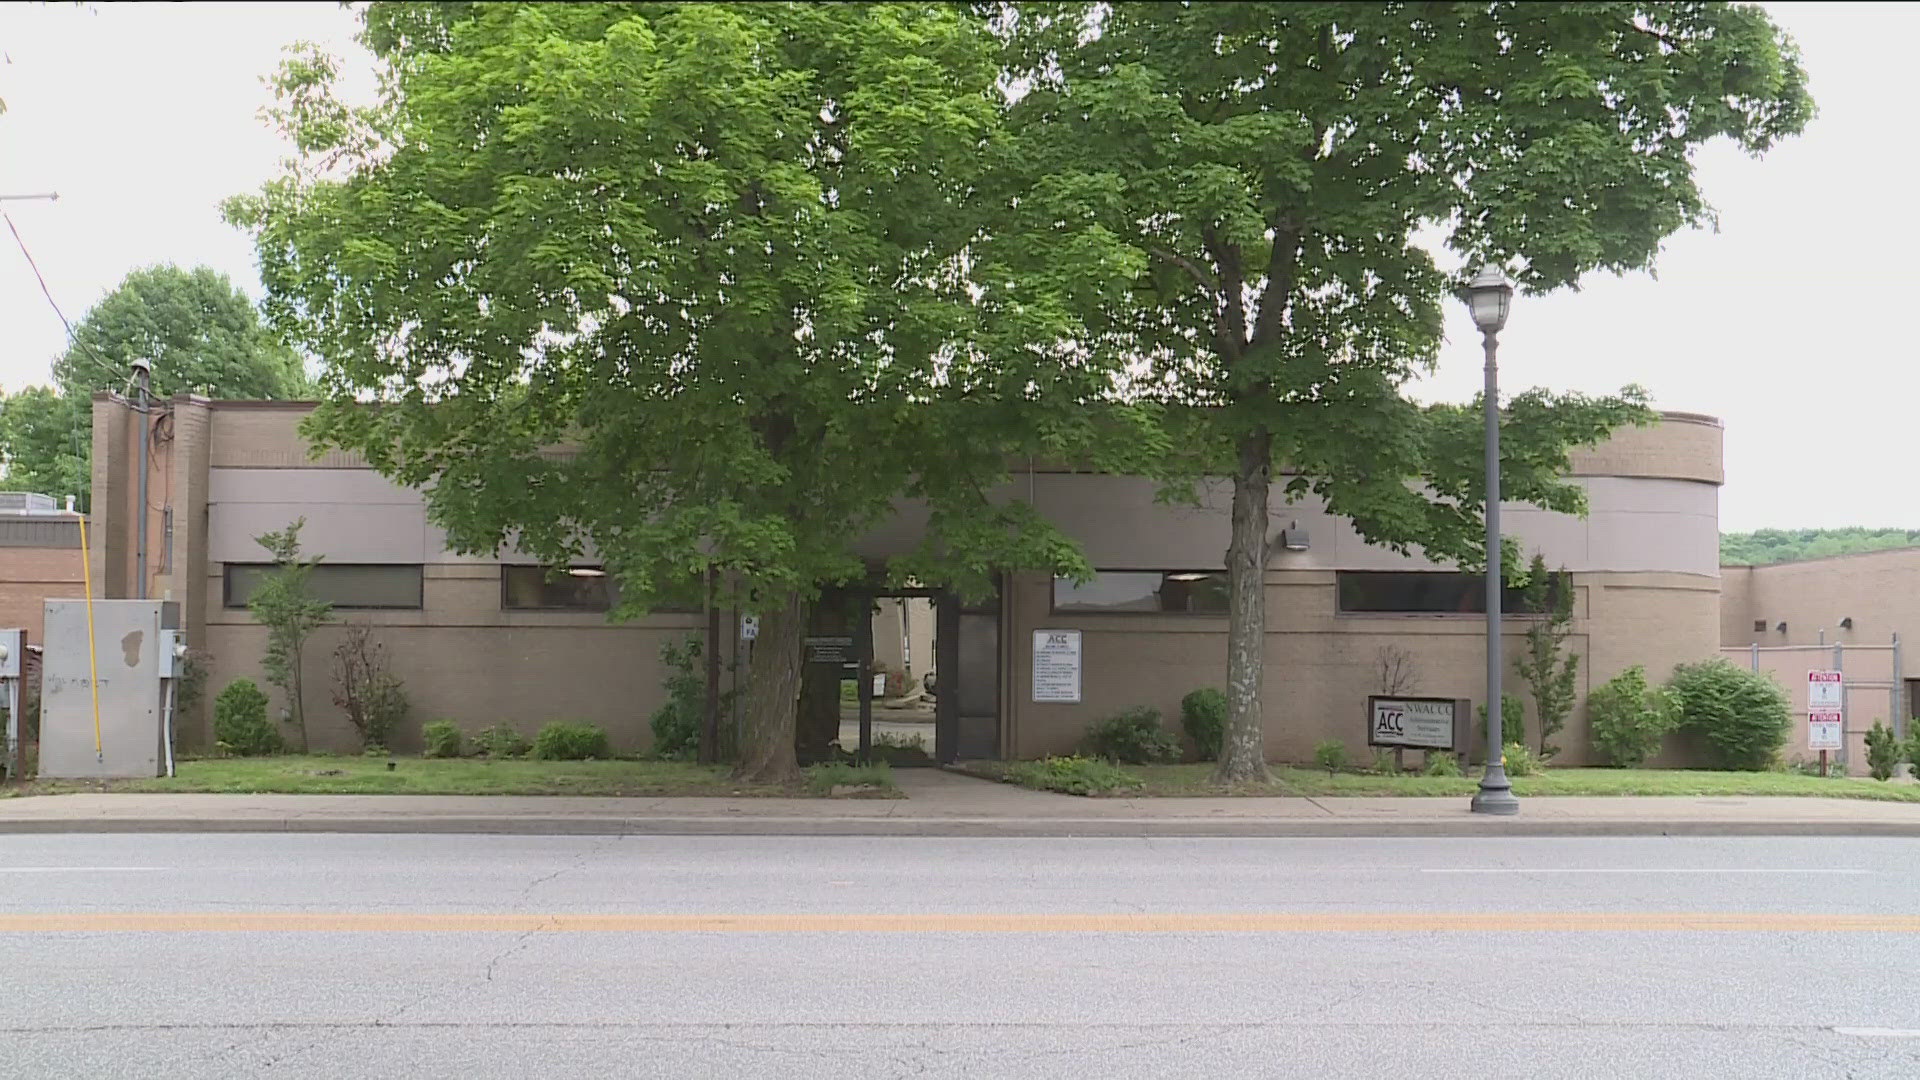 NEW TONIGHT AT 10 – WASHINGTON COUNTY SAYS IT WILL TAKE OVER THE OLD COUNTY JAIL – WHICH IS NOW THE NORTHWEST ARKANSAS CORRECTIONS CENTER FOR WOMEN...